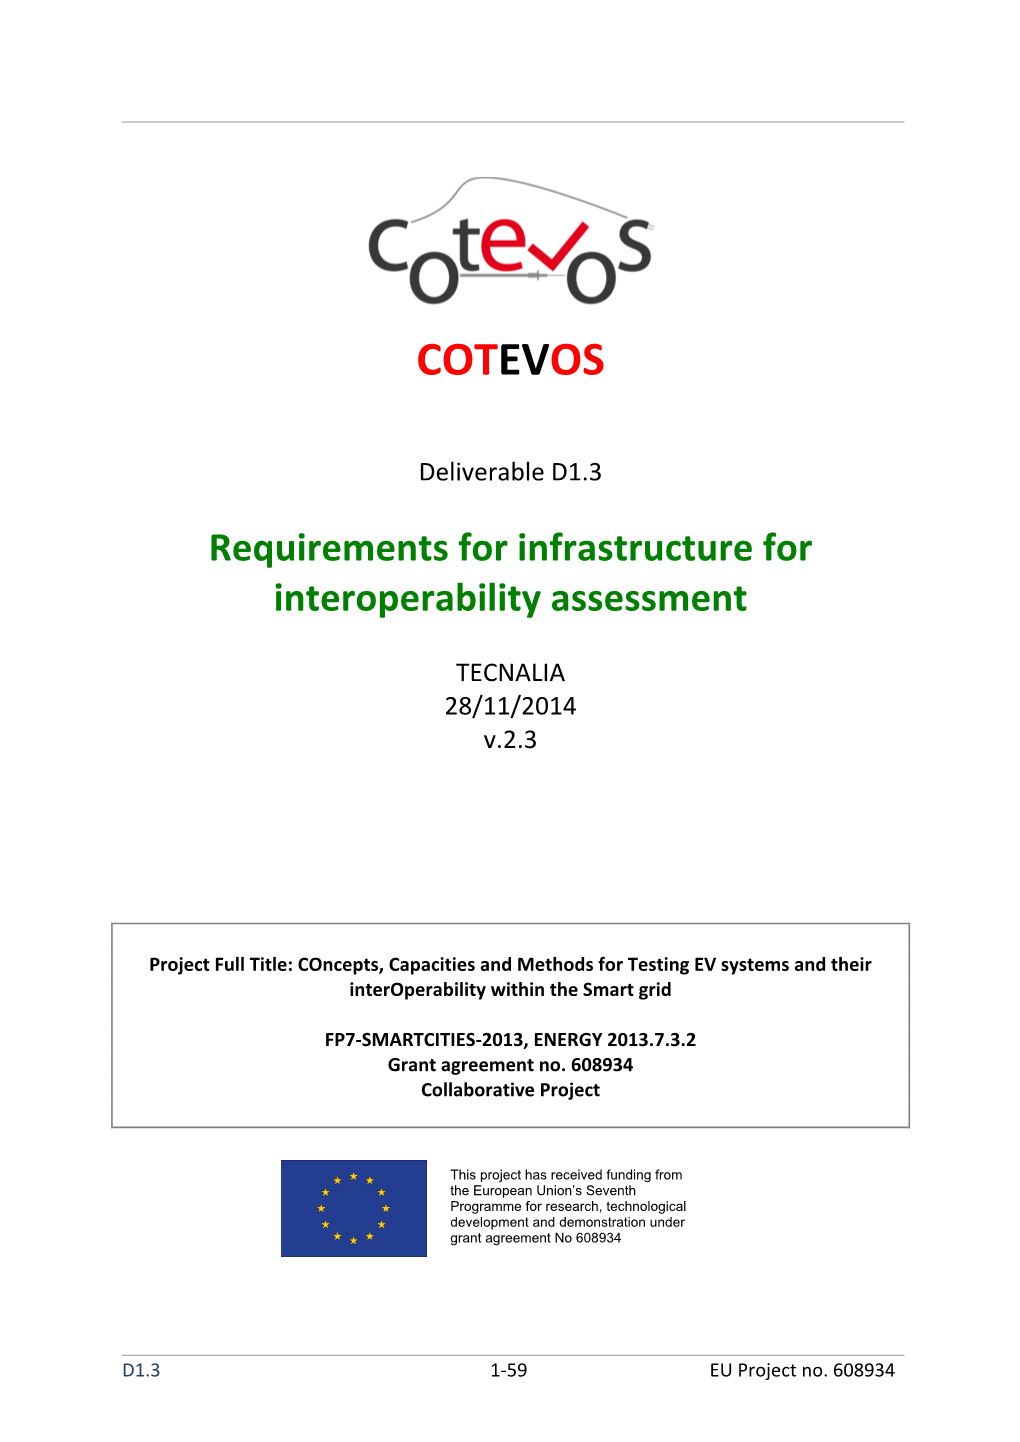 Requirements for Infrastructure for Interoperability Assessment